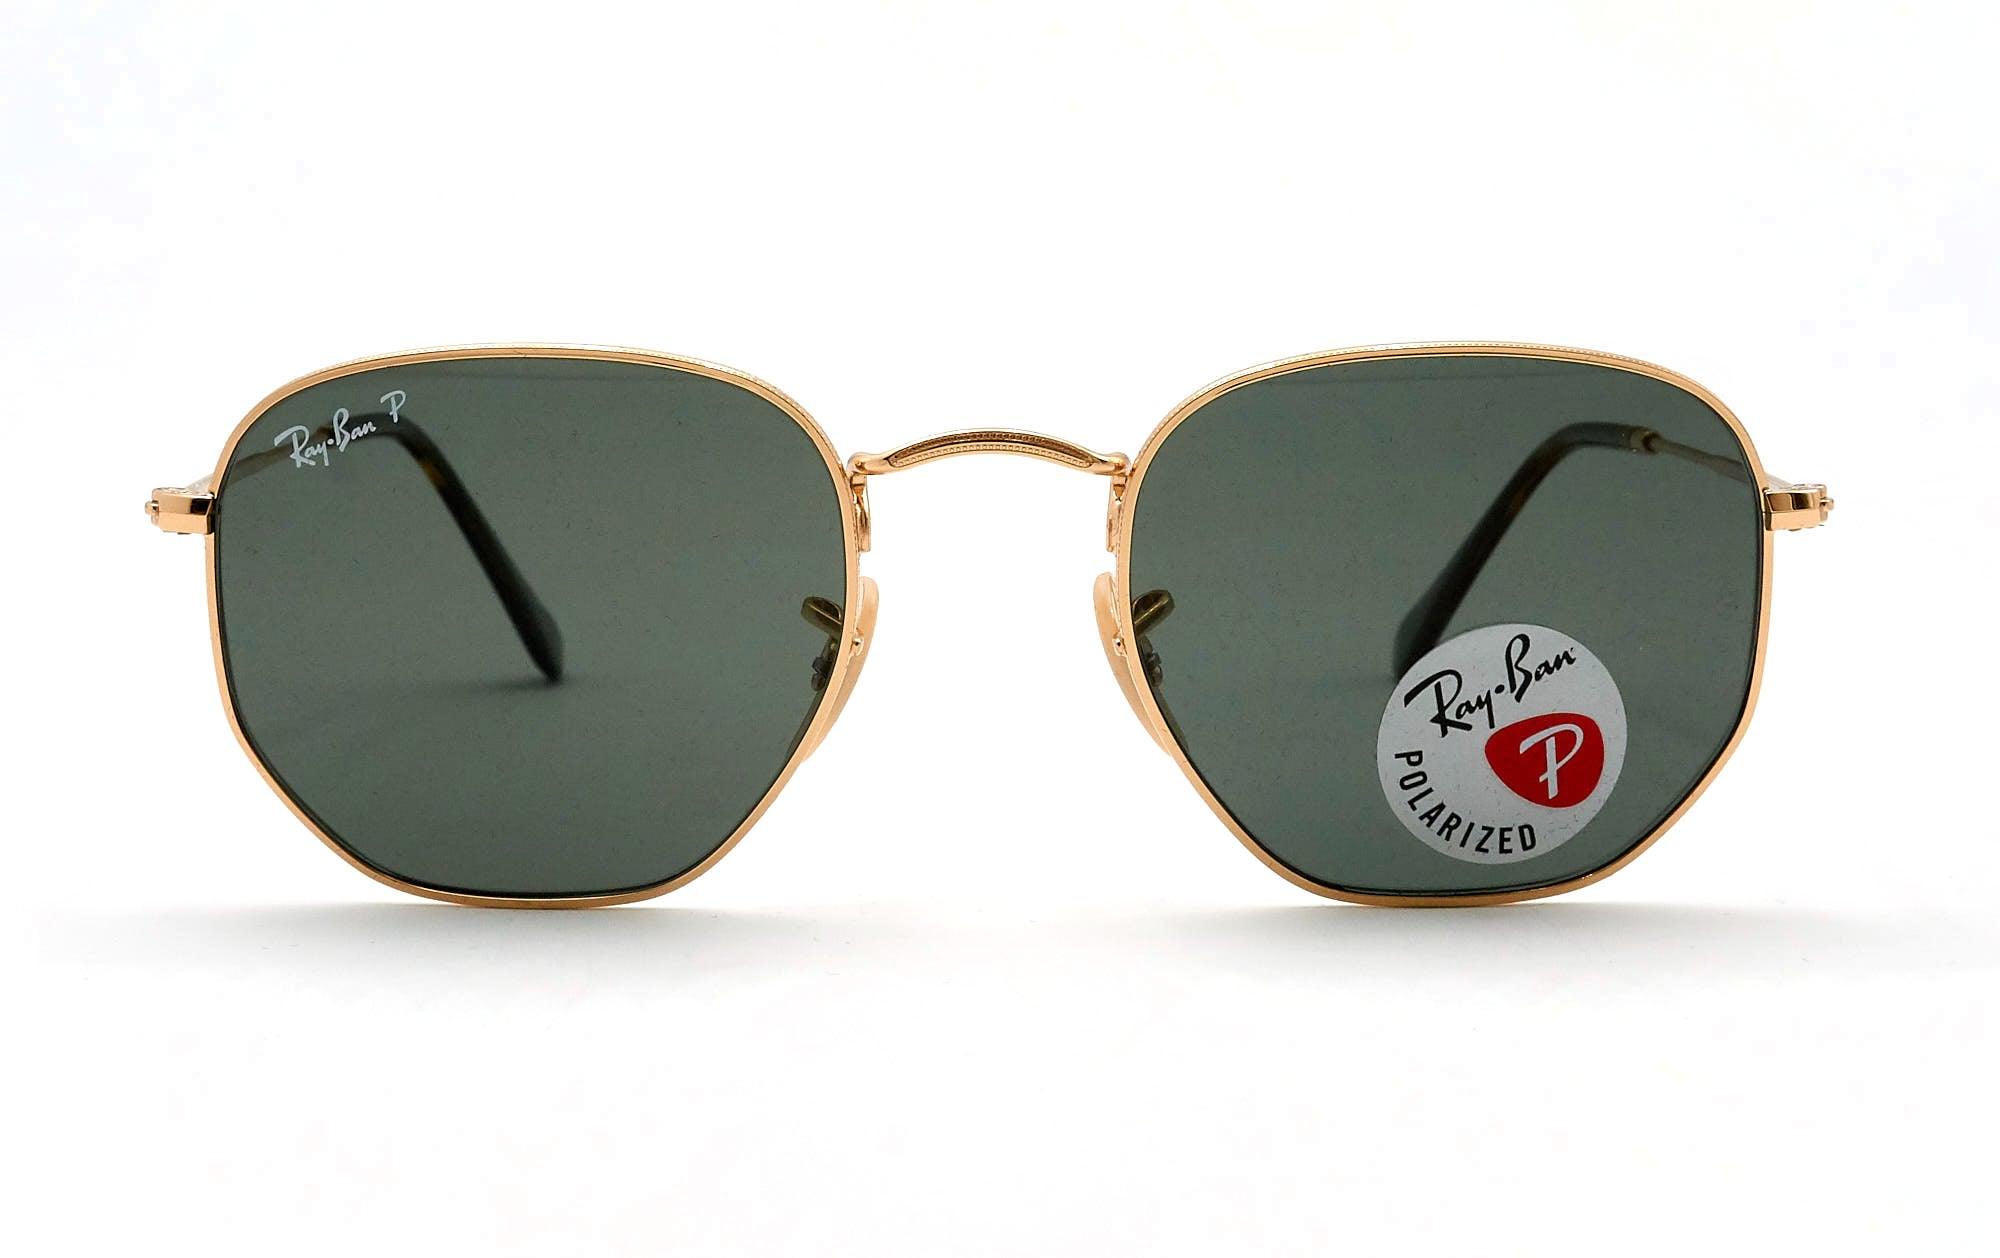 RAY-BAN 3548N 00158 POL - Opticas Lookout